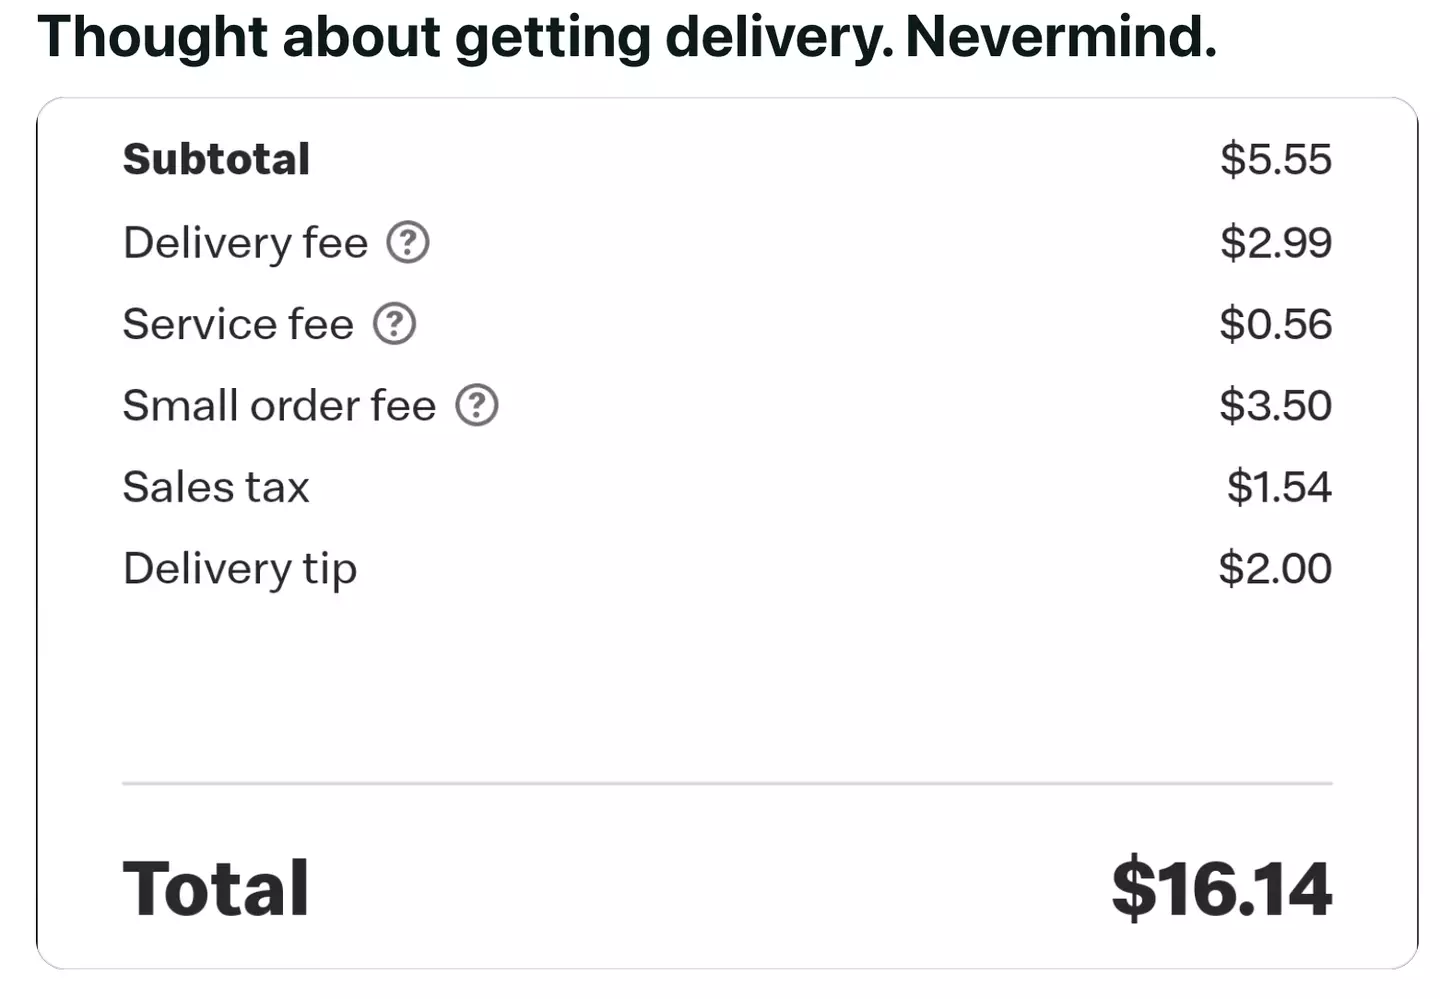 A Redditor hit out at the extra costs they were facing for their order.